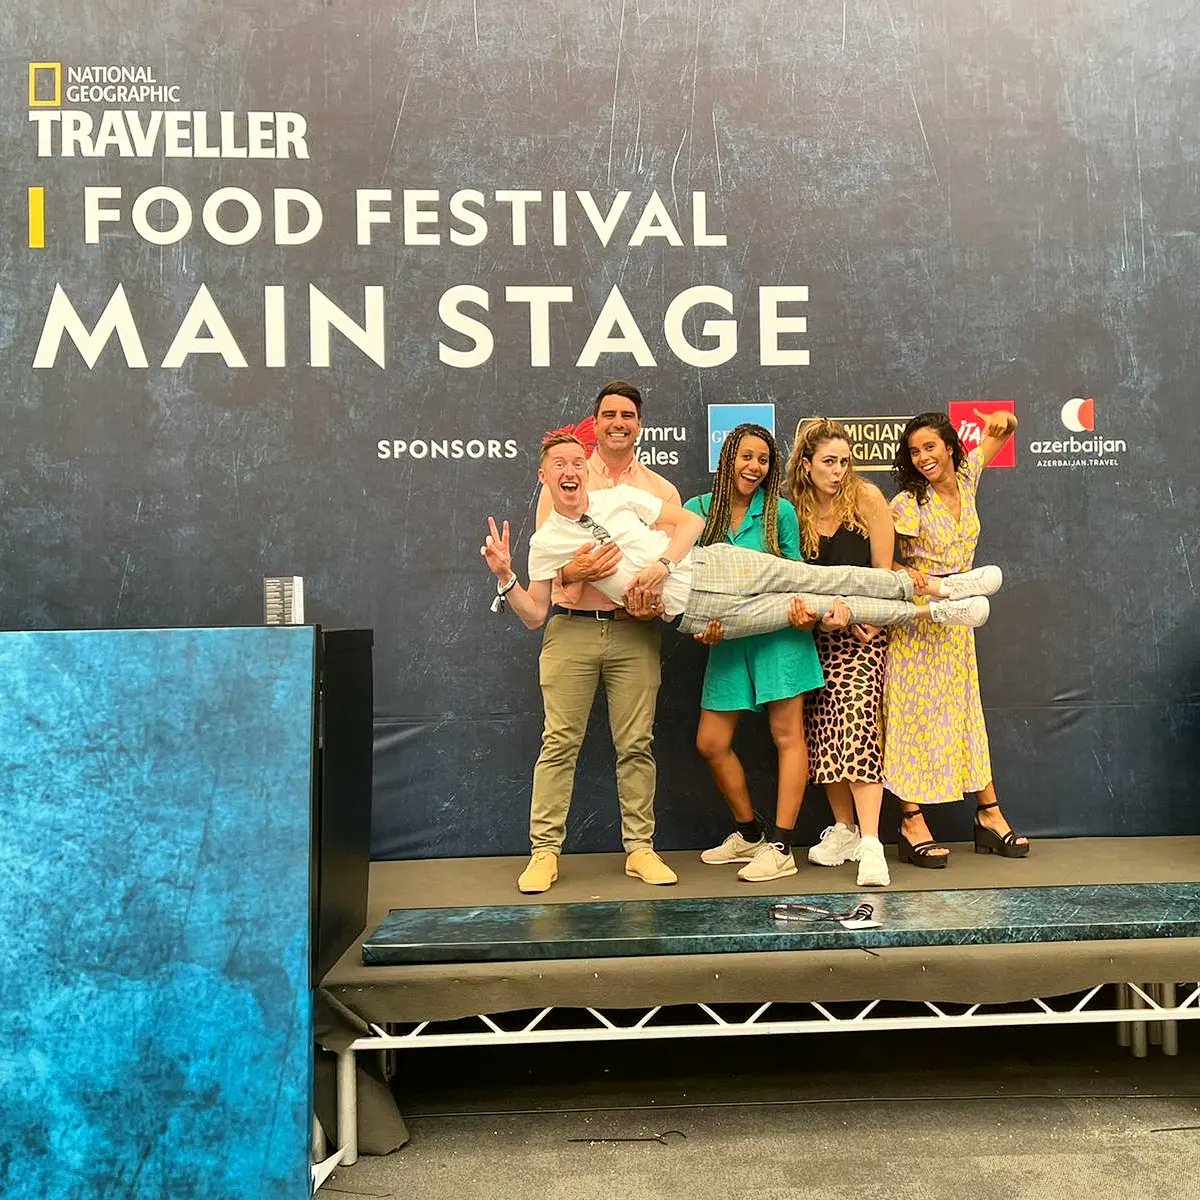 That's right, I'll be back hosting the wine and spirits theatre at @NatGeoTravelUK Food Festival on 15-16 July. More deets here: foodfestival.natgeotraveller.co.uk

#NGTFoodFestival #foodwriter #travelwriter